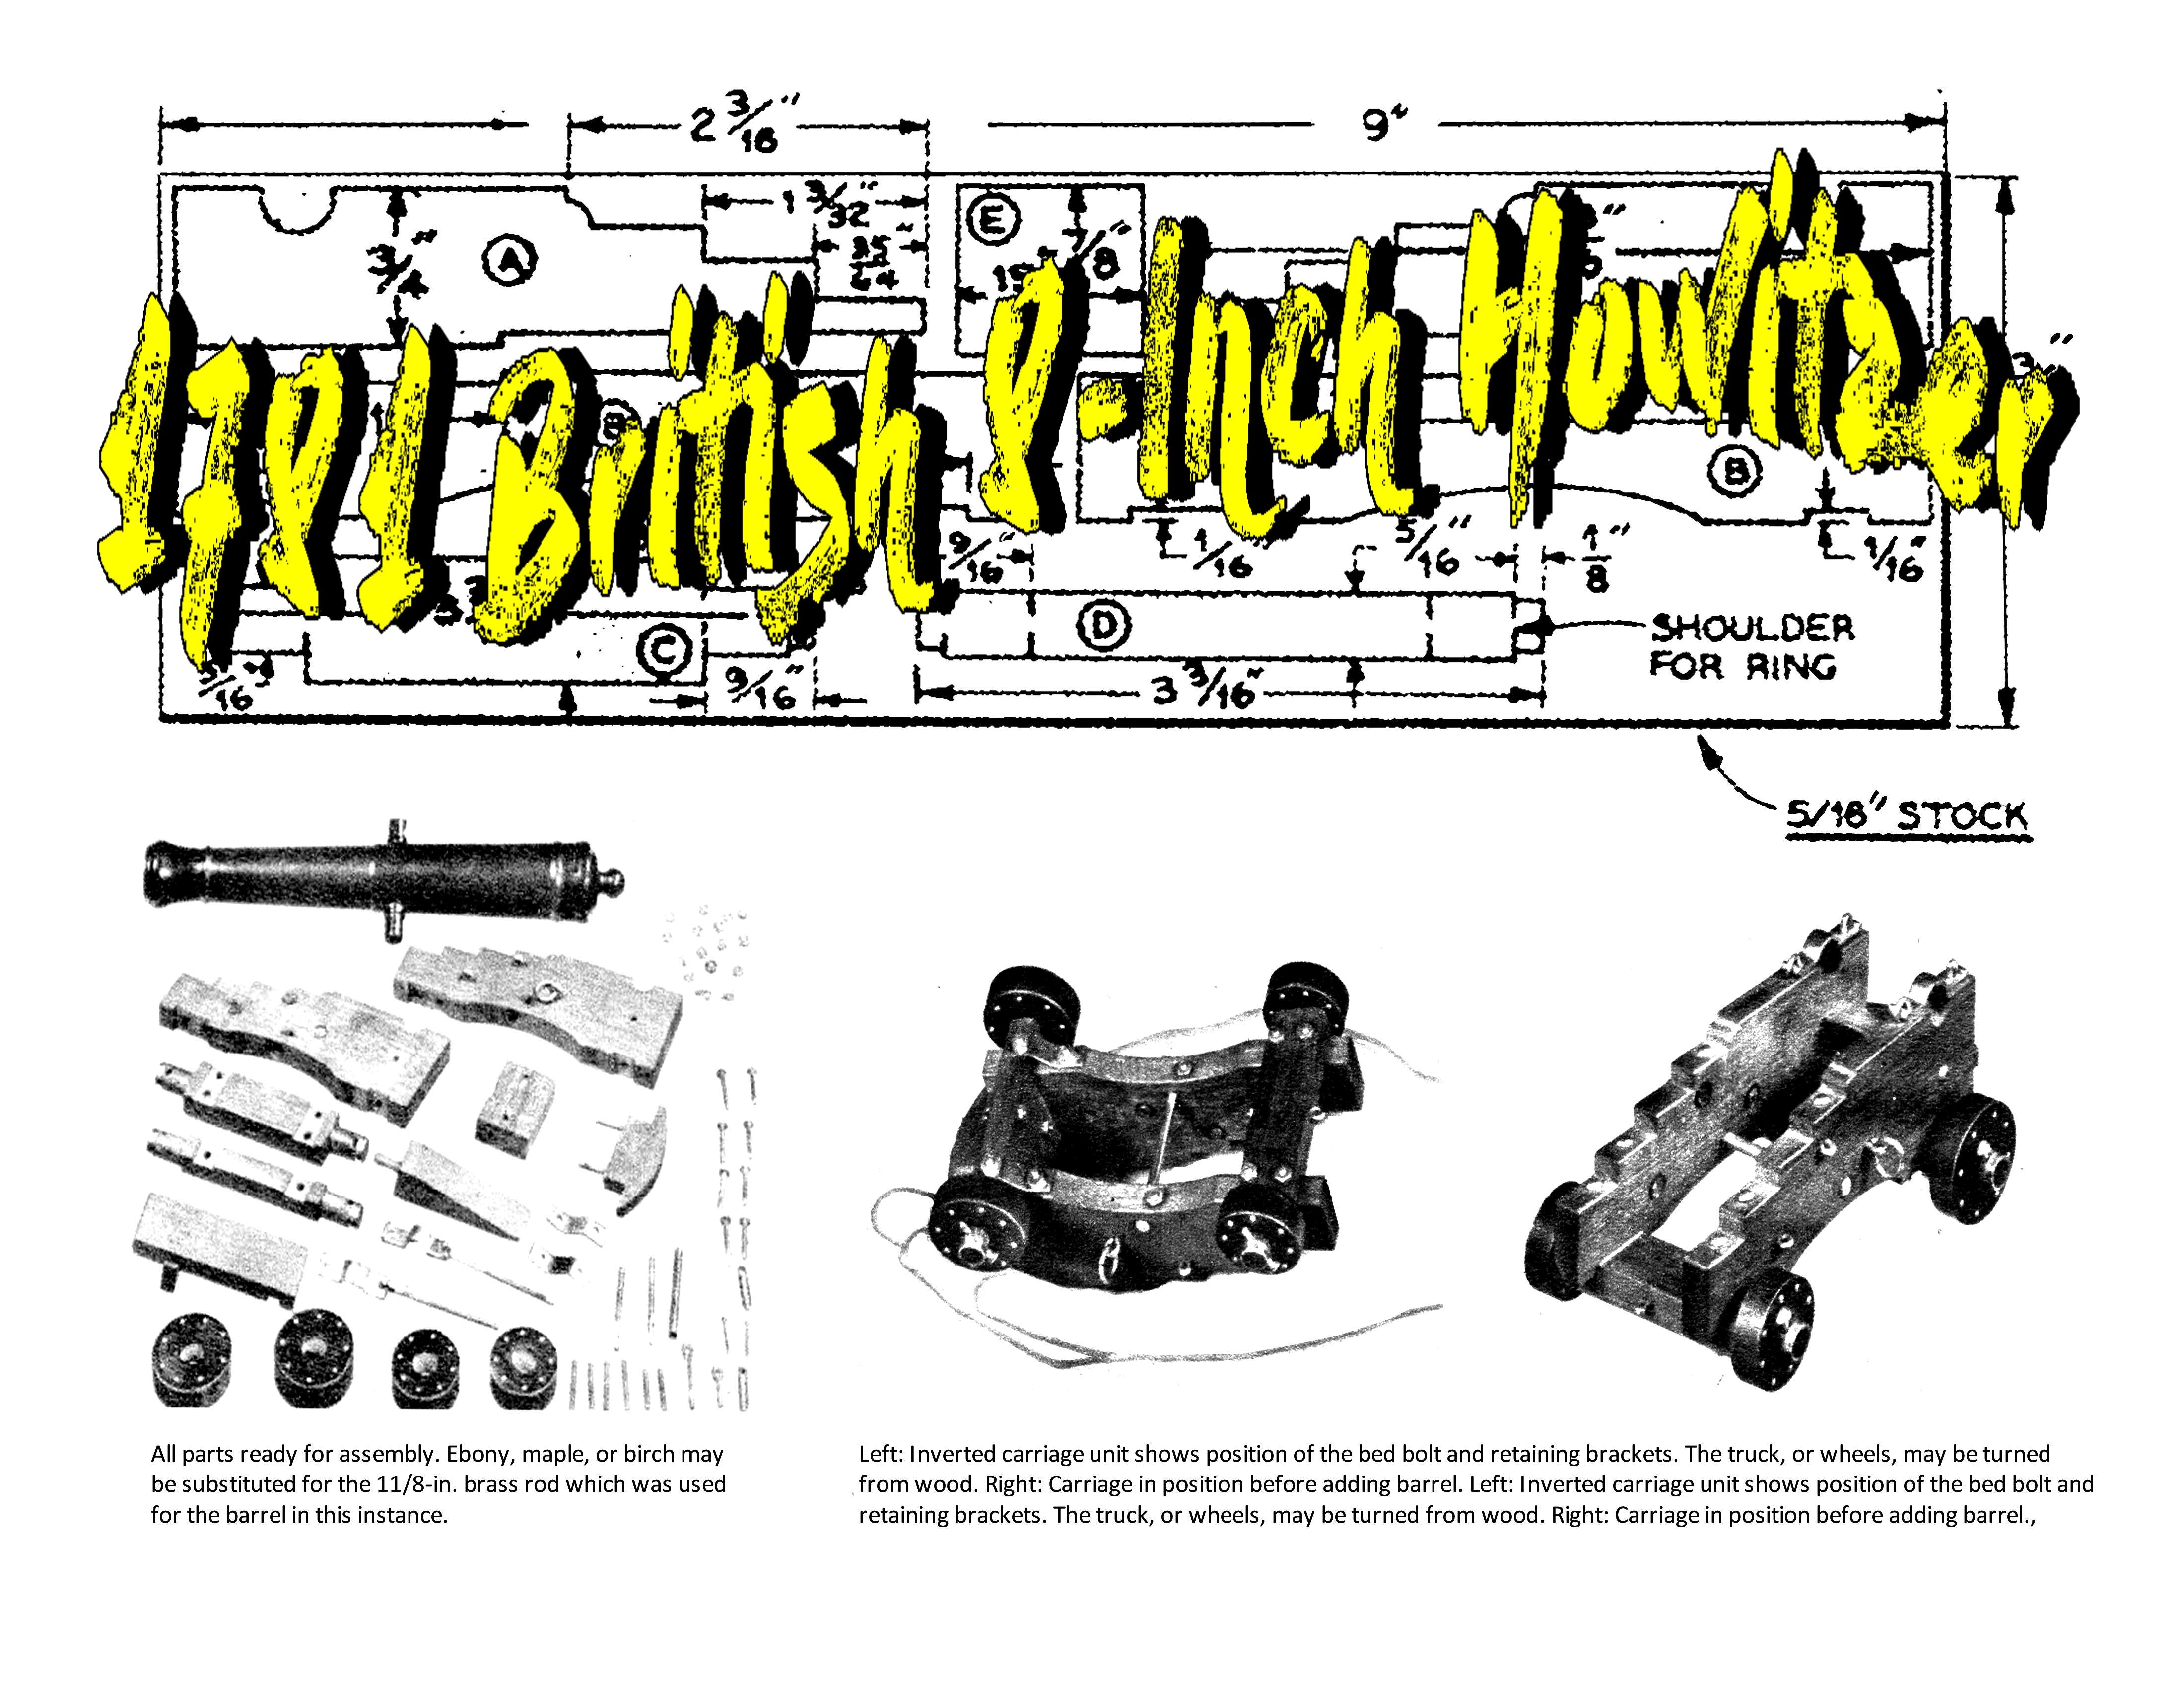 printed plans and article miniature eighteen-pounder scale 1:12  overall length 8 1/2"  width 3 3/16"